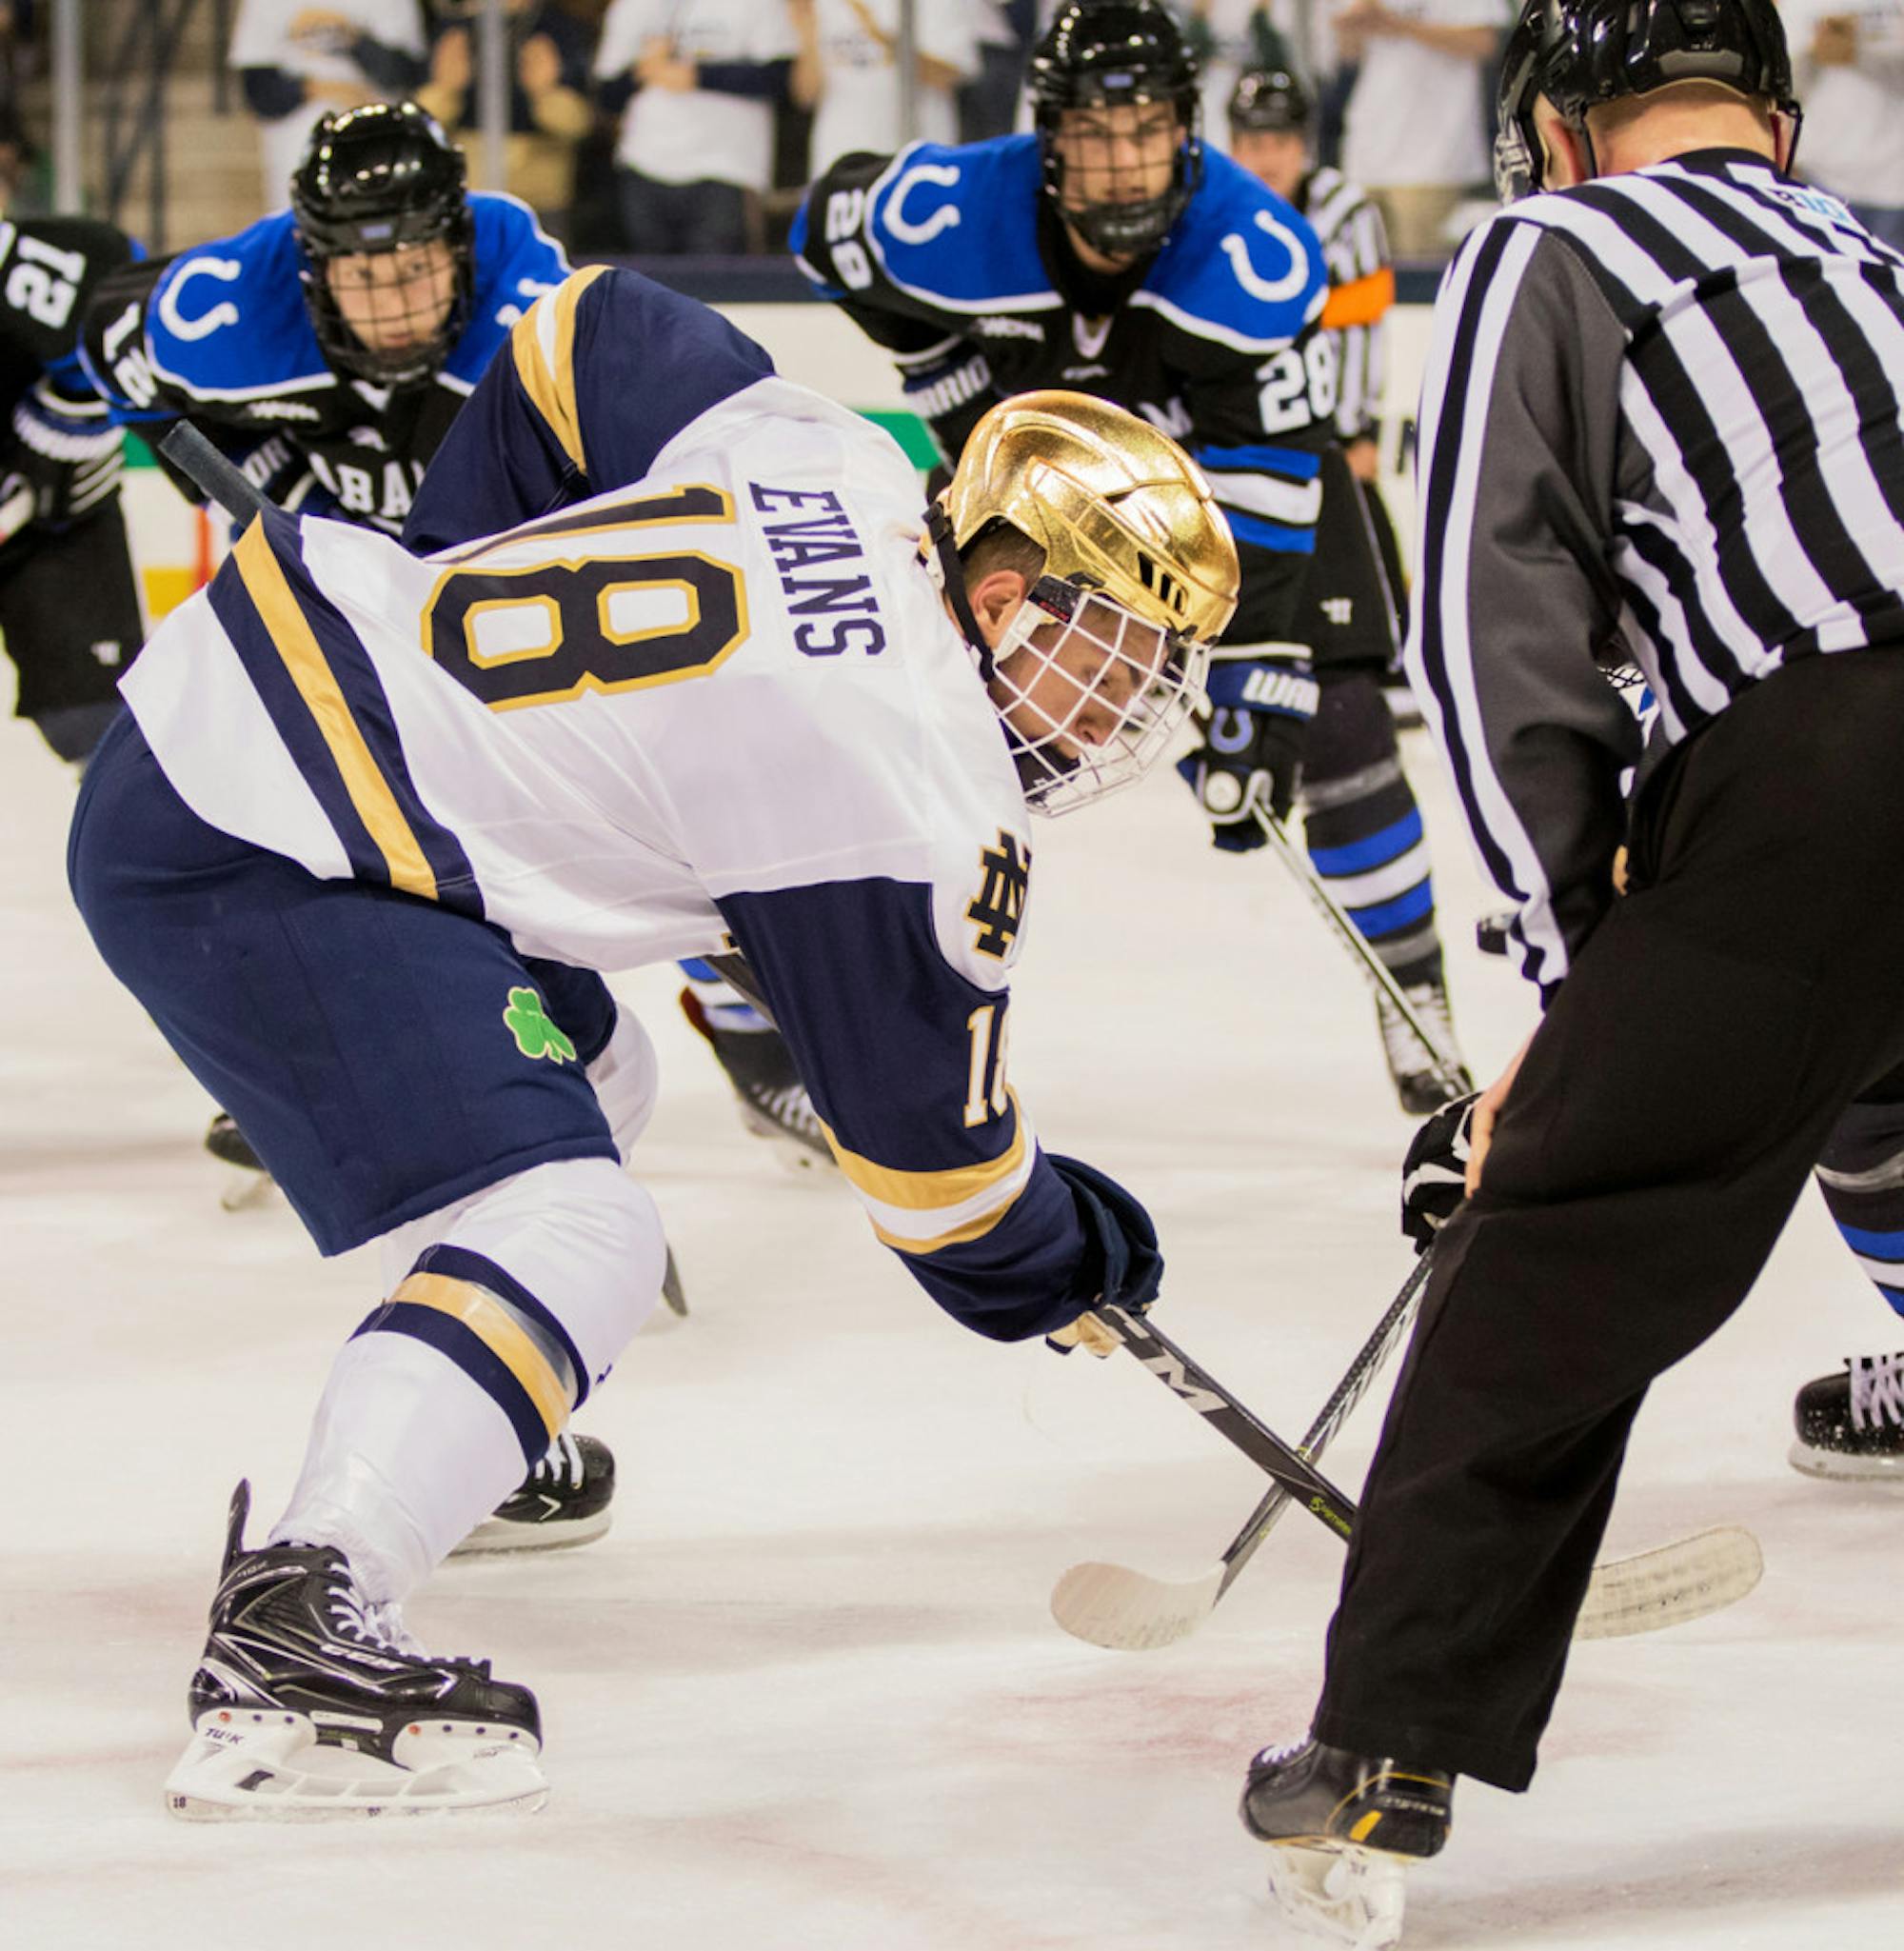 Irish senior forward Jake Evans prepares for the puck to drop during a faceoff in Notre Dame’s 5-3 win over Alabama-Huntsville on Friday.